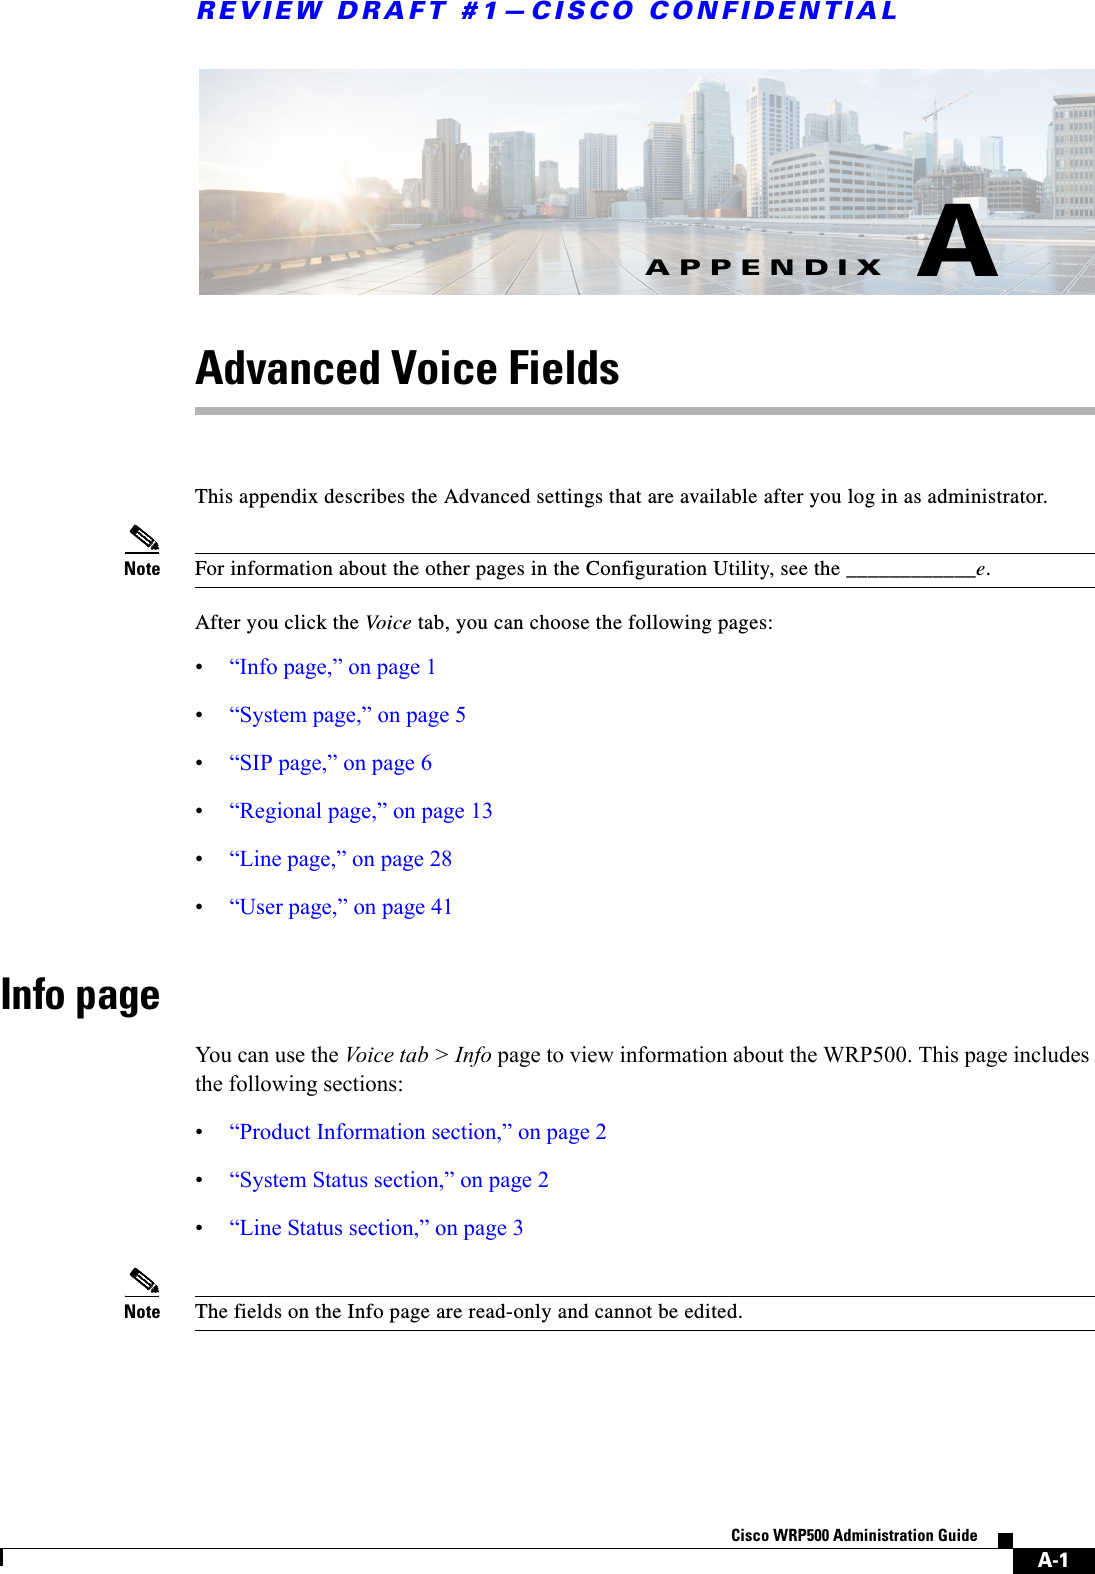 A-1Cisco WRP500 Administration Guide APPENDIXREVIEW DRAFT #1—CISCO CONFIDENTIALAAdvanced Voice Fields This appendix describes the Advanced settings that are available after you log in as administrator.Note For information about the other pages in the Configuration Utility, see the ____________e.After you click the Voice tab, you can choose the following pages:•“Info page,” on page 1 •“System page,” on page 5 •“SIP page,” on page 6•“Regional page,” on page 13 •“Line page,” on page 28•“User page,” on page 41Info pageYou can use the Voice tab &gt; Info page to view information about the WRP500. This page includes the following sections:•“Product Information section,” on page 2•“System Status section,” on page 2•“Line Status section,” on page 3Note The fields on the Info page are read-only and cannot be edited. 